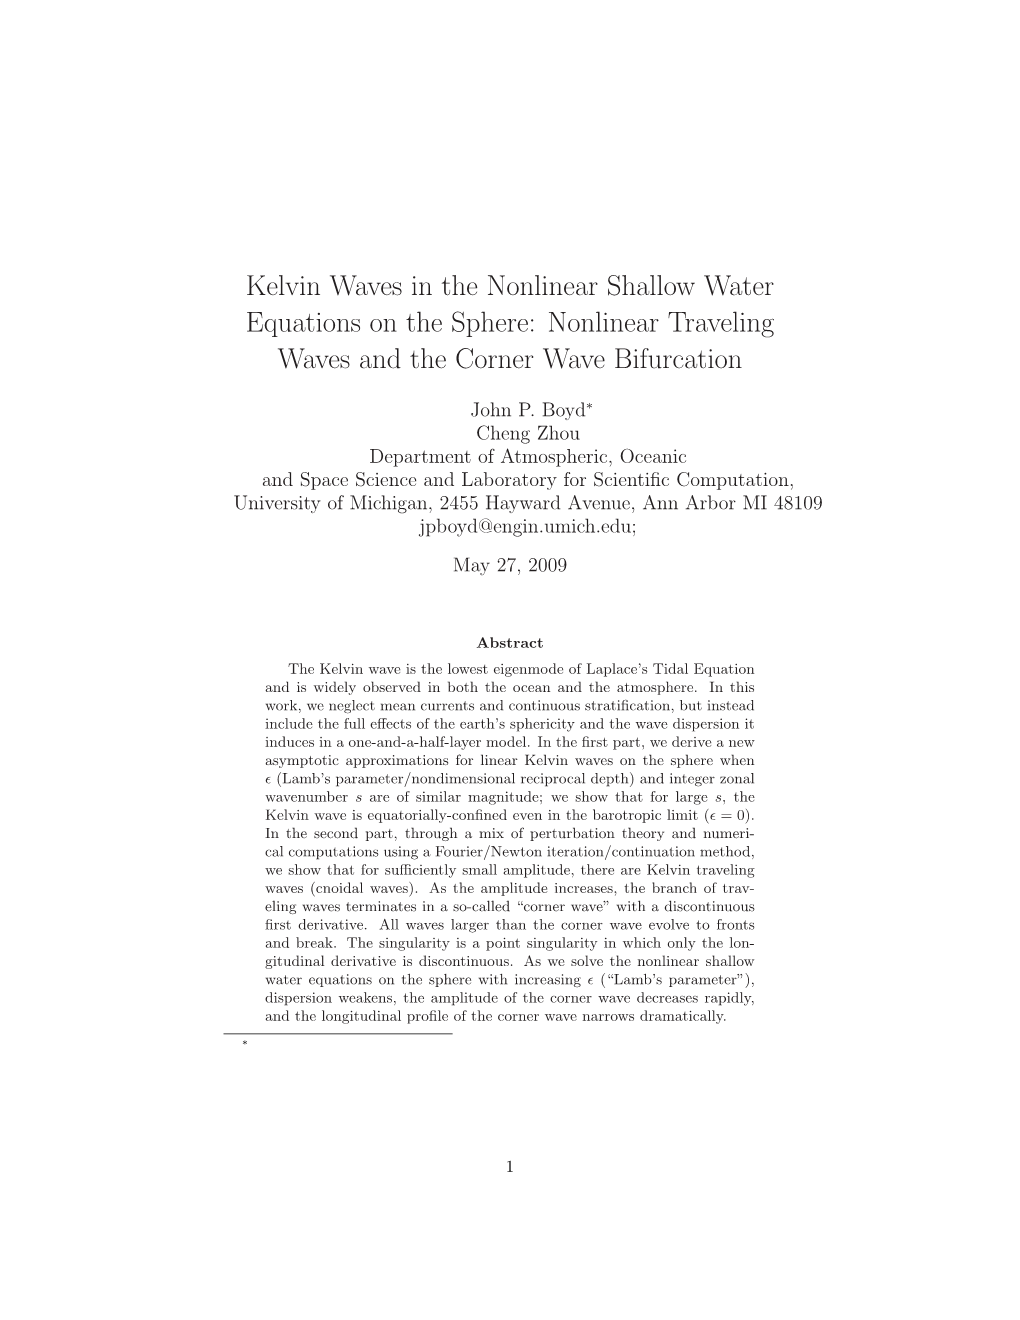 Kelvin Waves in the Nonlinear Shallow Water Equations on the Sphere: Nonlinear Traveling Waves and the Corner Wave Bifurcation